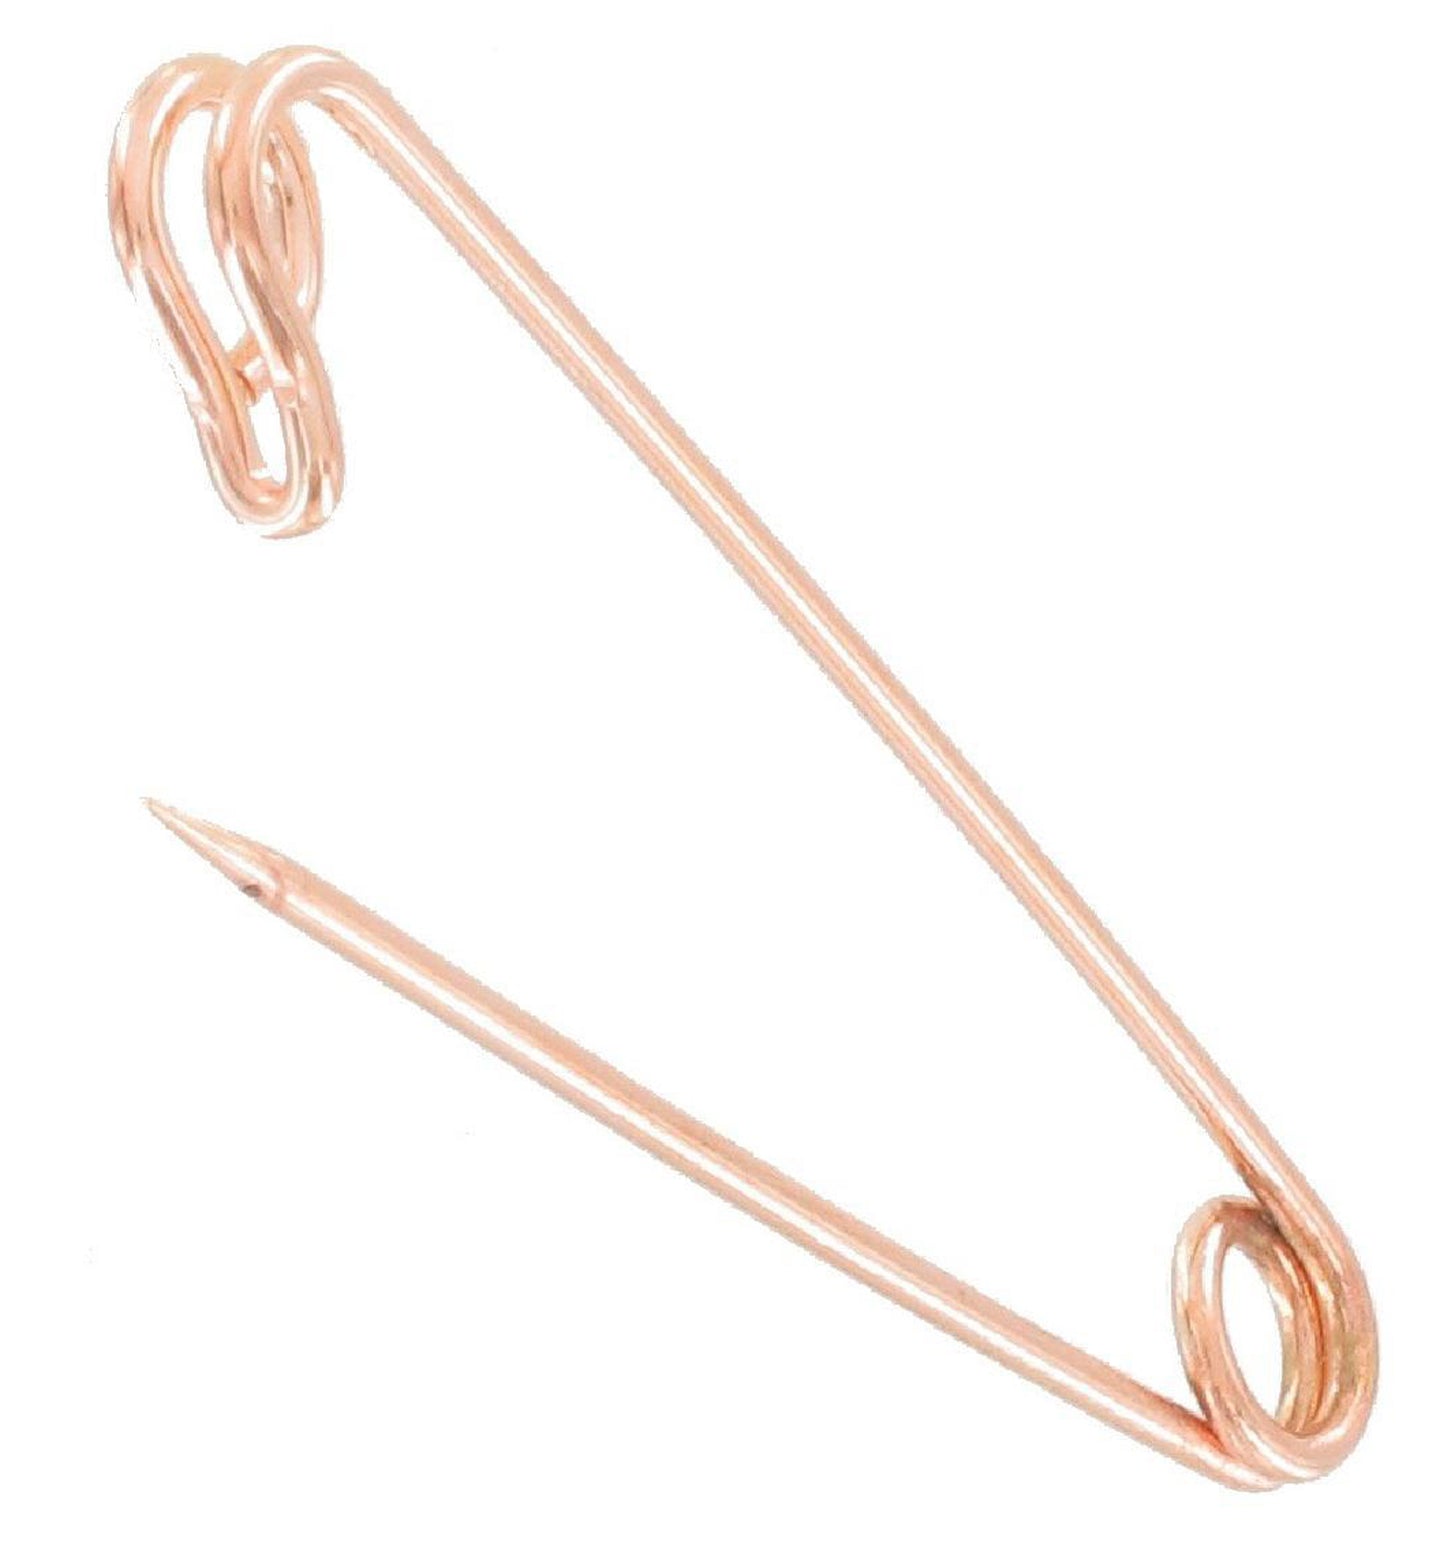 Ky & Co End Made in USA Safety Pin Brooch Jewish Mazel Charm Rose Gold Tone  2"